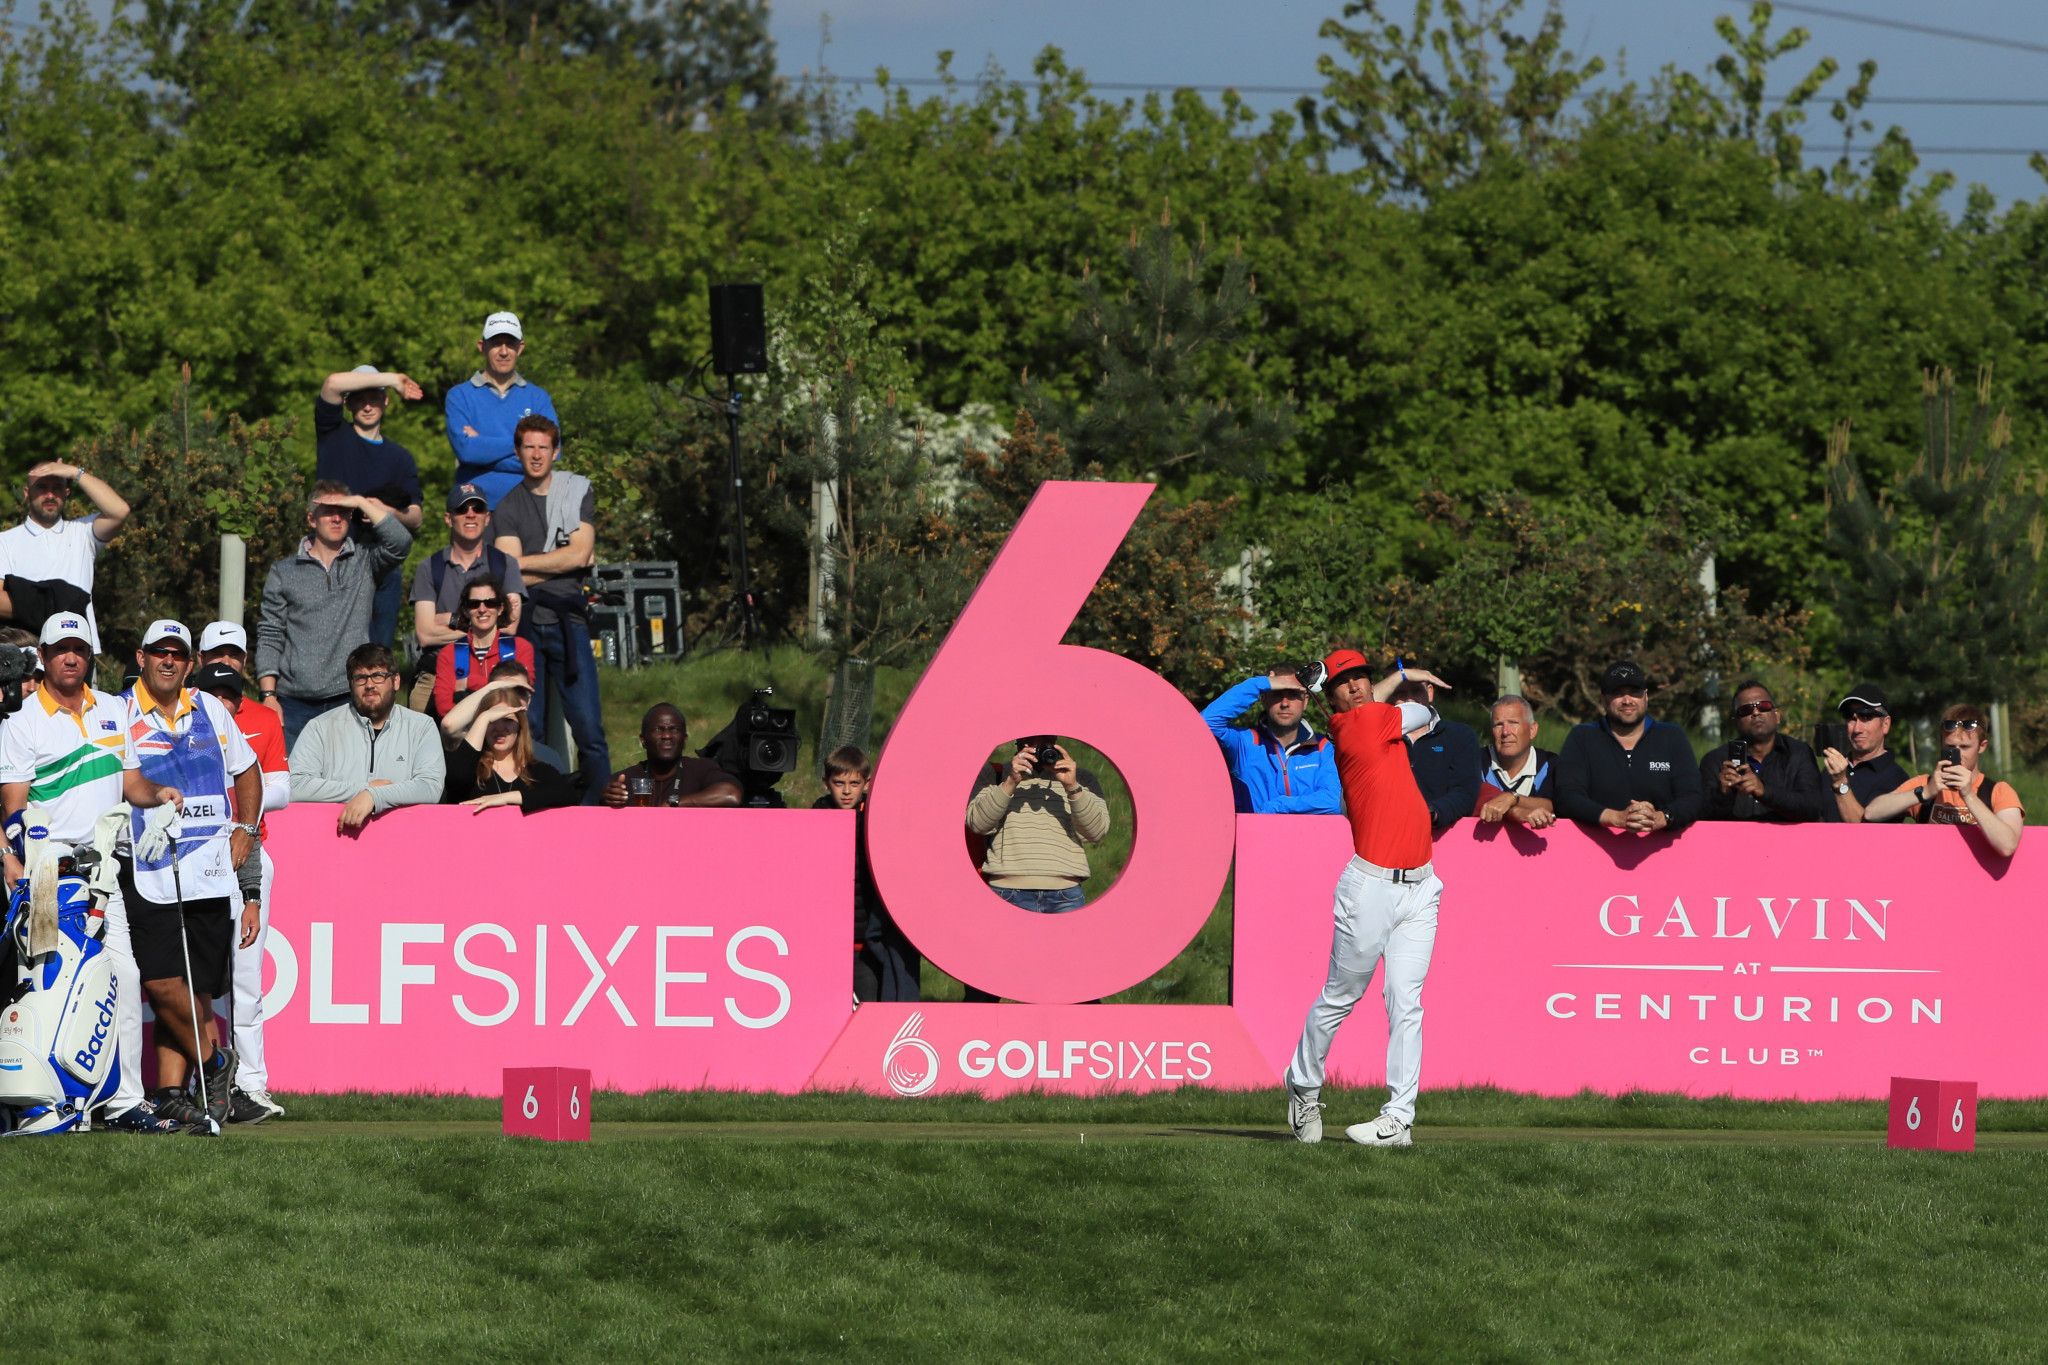 European Tour confirm GolfSixes to return to St Albans this year following success of inaugural edition